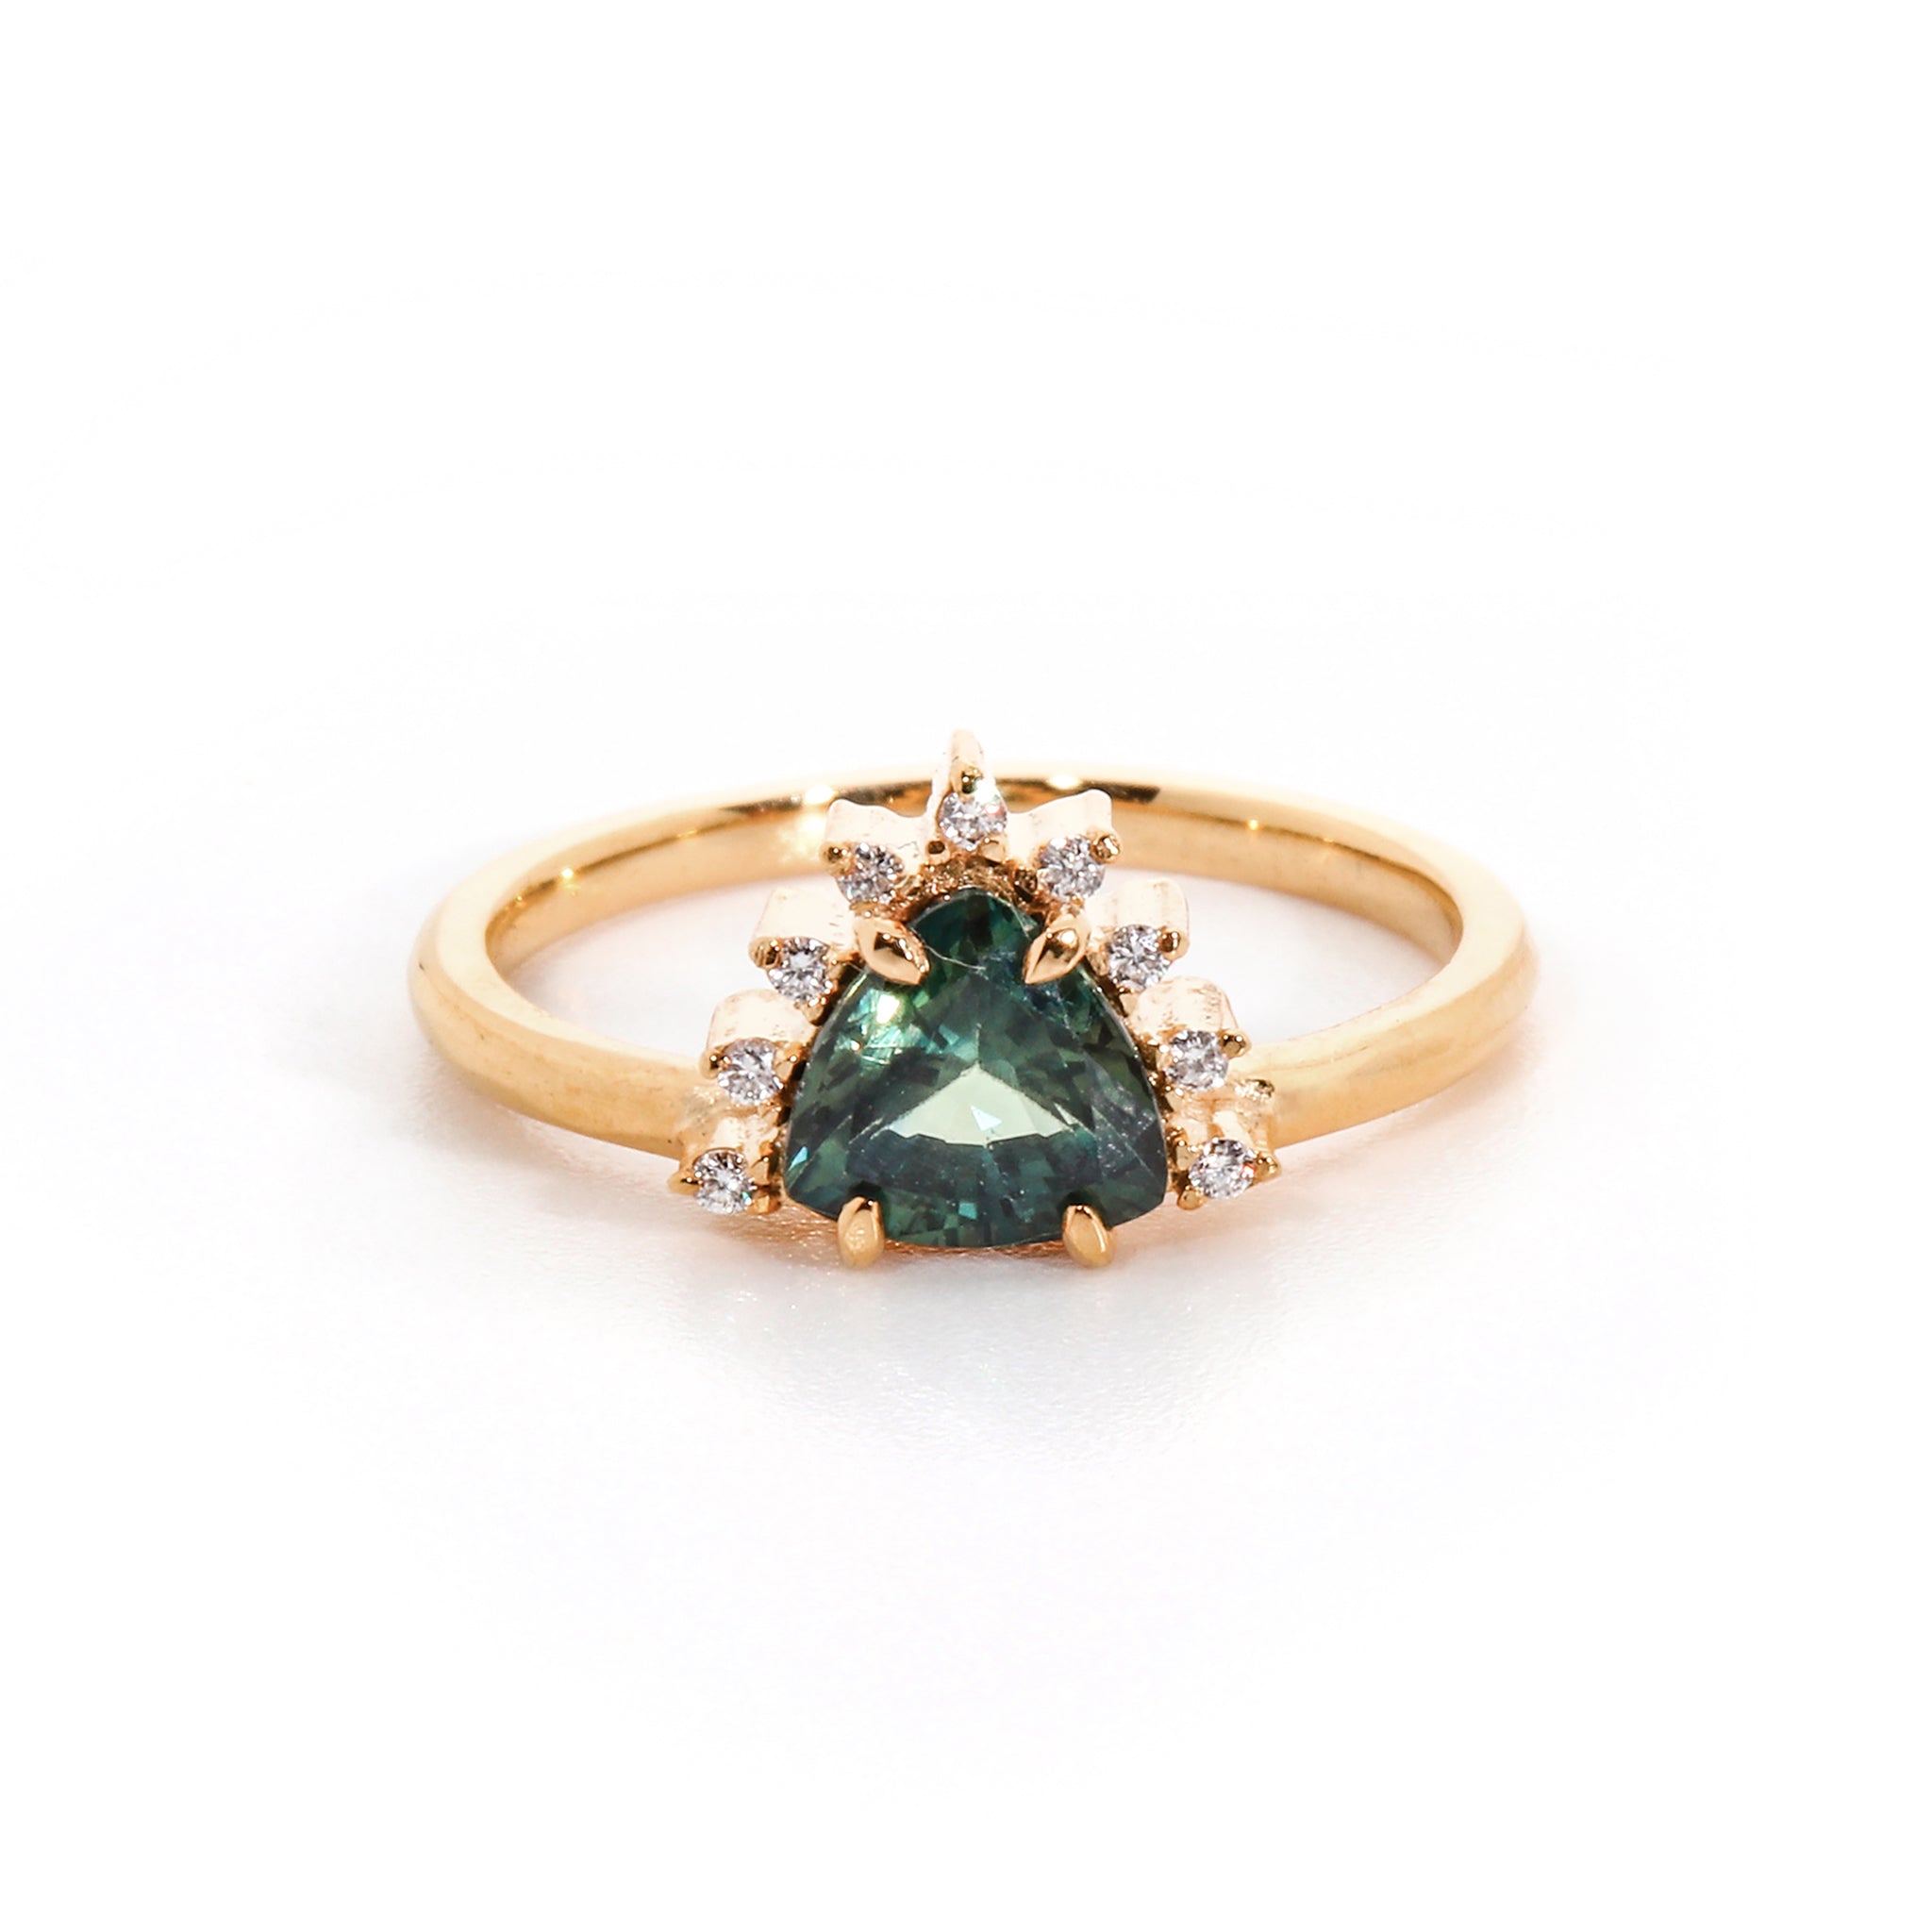 Ring with Trillion Cut Teal Sapphire and Diamonds